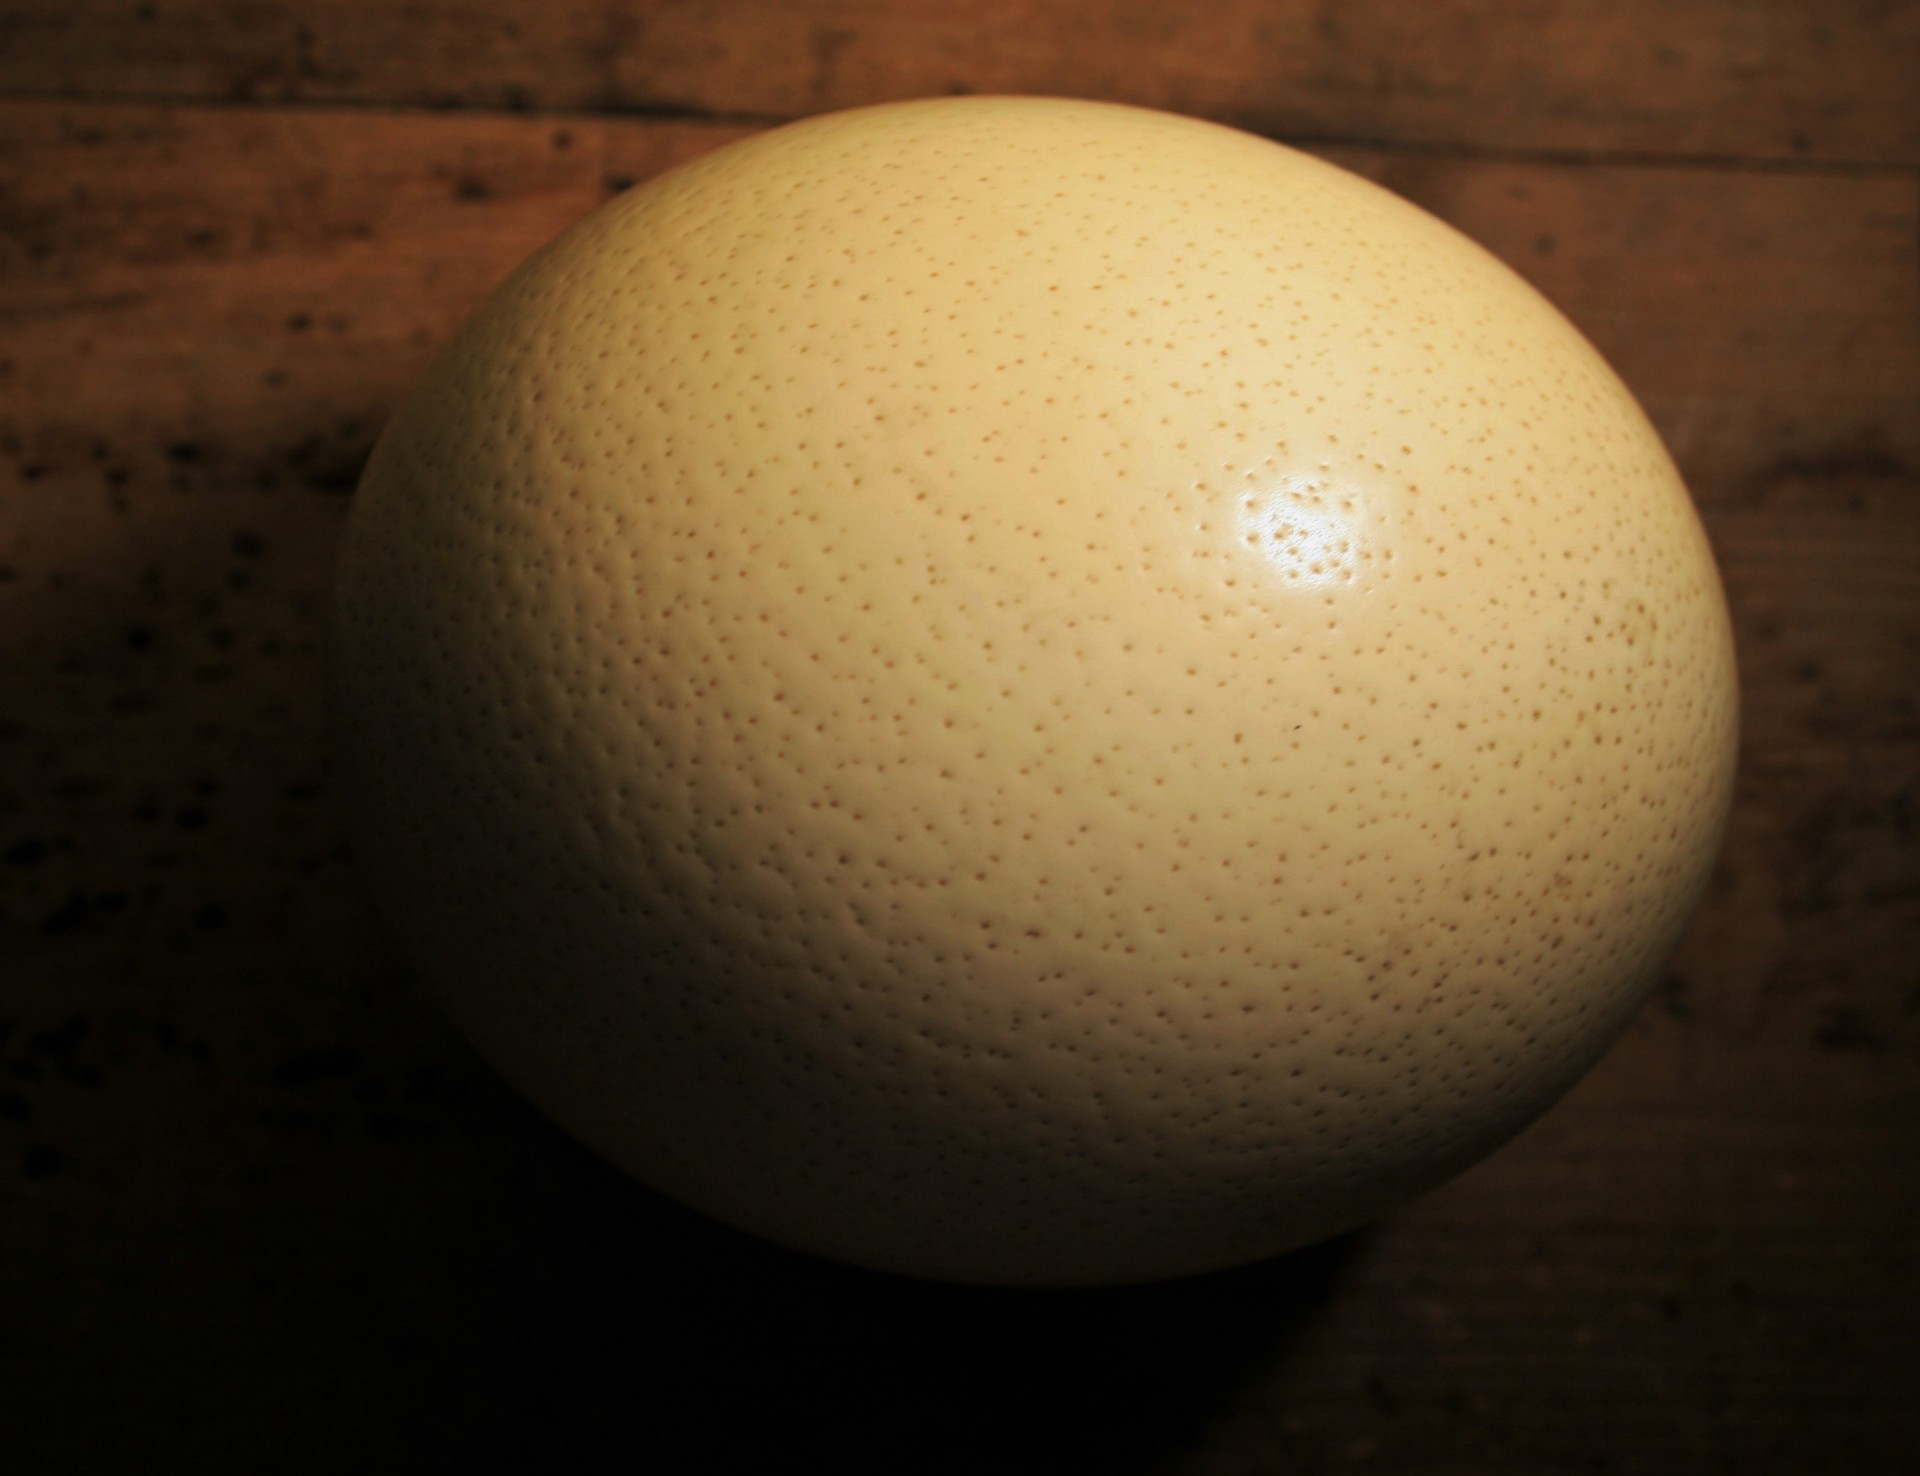 ostrich egg shell free photo